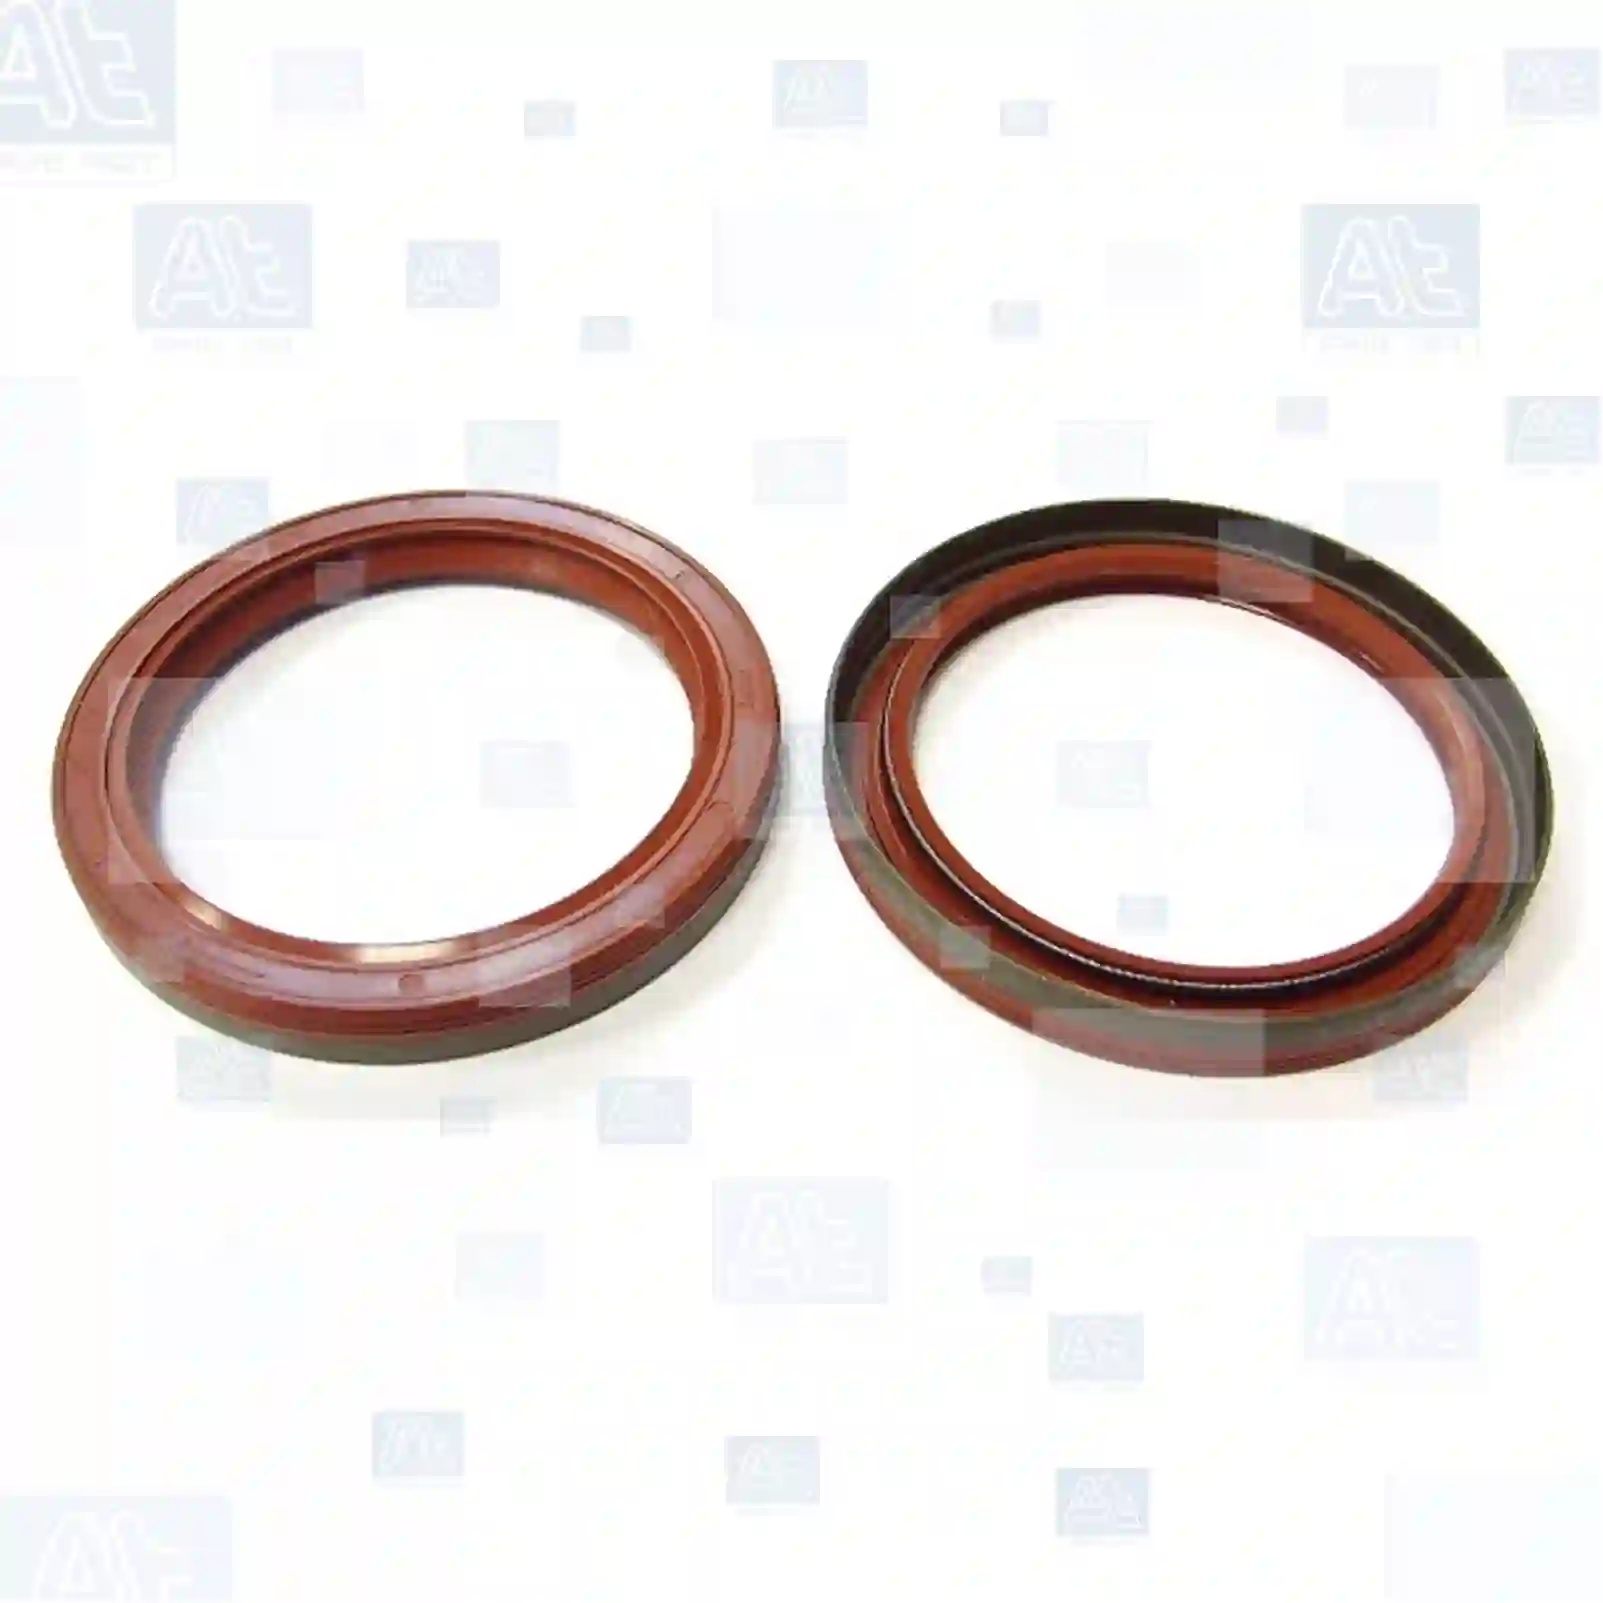 Oil seal, 77701246, 98454041, 080729, 1615787, 07301198, 40003650, 40003657, 40100070, 40100331, 40100334, 5000815434, 98427998, 98428409, 98454041, 99433965, 9111049, 40100331, 42531636, 42562103, 98427998, 98454039, 98454041, 40003650, 40100330, 98428409, 98454041, 06562790359, 4403049, 080729, 5000815434, 5001001254, 5001853924, 7701035740, 7701046541, 7701461930 ||  77701246 At Spare Part | Engine, Accelerator Pedal, Camshaft, Connecting Rod, Crankcase, Crankshaft, Cylinder Head, Engine Suspension Mountings, Exhaust Manifold, Exhaust Gas Recirculation, Filter Kits, Flywheel Housing, General Overhaul Kits, Engine, Intake Manifold, Oil Cleaner, Oil Cooler, Oil Filter, Oil Pump, Oil Sump, Piston & Liner, Sensor & Switch, Timing Case, Turbocharger, Cooling System, Belt Tensioner, Coolant Filter, Coolant Pipe, Corrosion Prevention Agent, Drive, Expansion Tank, Fan, Intercooler, Monitors & Gauges, Radiator, Thermostat, V-Belt / Timing belt, Water Pump, Fuel System, Electronical Injector Unit, Feed Pump, Fuel Filter, cpl., Fuel Gauge Sender,  Fuel Line, Fuel Pump, Fuel Tank, Injection Line Kit, Injection Pump, Exhaust System, Clutch & Pedal, Gearbox, Propeller Shaft, Axles, Brake System, Hubs & Wheels, Suspension, Leaf Spring, Universal Parts / Accessories, Steering, Electrical System, Cabin Oil seal, 77701246, 98454041, 080729, 1615787, 07301198, 40003650, 40003657, 40100070, 40100331, 40100334, 5000815434, 98427998, 98428409, 98454041, 99433965, 9111049, 40100331, 42531636, 42562103, 98427998, 98454039, 98454041, 40003650, 40100330, 98428409, 98454041, 06562790359, 4403049, 080729, 5000815434, 5001001254, 5001853924, 7701035740, 7701046541, 7701461930 ||  77701246 At Spare Part | Engine, Accelerator Pedal, Camshaft, Connecting Rod, Crankcase, Crankshaft, Cylinder Head, Engine Suspension Mountings, Exhaust Manifold, Exhaust Gas Recirculation, Filter Kits, Flywheel Housing, General Overhaul Kits, Engine, Intake Manifold, Oil Cleaner, Oil Cooler, Oil Filter, Oil Pump, Oil Sump, Piston & Liner, Sensor & Switch, Timing Case, Turbocharger, Cooling System, Belt Tensioner, Coolant Filter, Coolant Pipe, Corrosion Prevention Agent, Drive, Expansion Tank, Fan, Intercooler, Monitors & Gauges, Radiator, Thermostat, V-Belt / Timing belt, Water Pump, Fuel System, Electronical Injector Unit, Feed Pump, Fuel Filter, cpl., Fuel Gauge Sender,  Fuel Line, Fuel Pump, Fuel Tank, Injection Line Kit, Injection Pump, Exhaust System, Clutch & Pedal, Gearbox, Propeller Shaft, Axles, Brake System, Hubs & Wheels, Suspension, Leaf Spring, Universal Parts / Accessories, Steering, Electrical System, Cabin